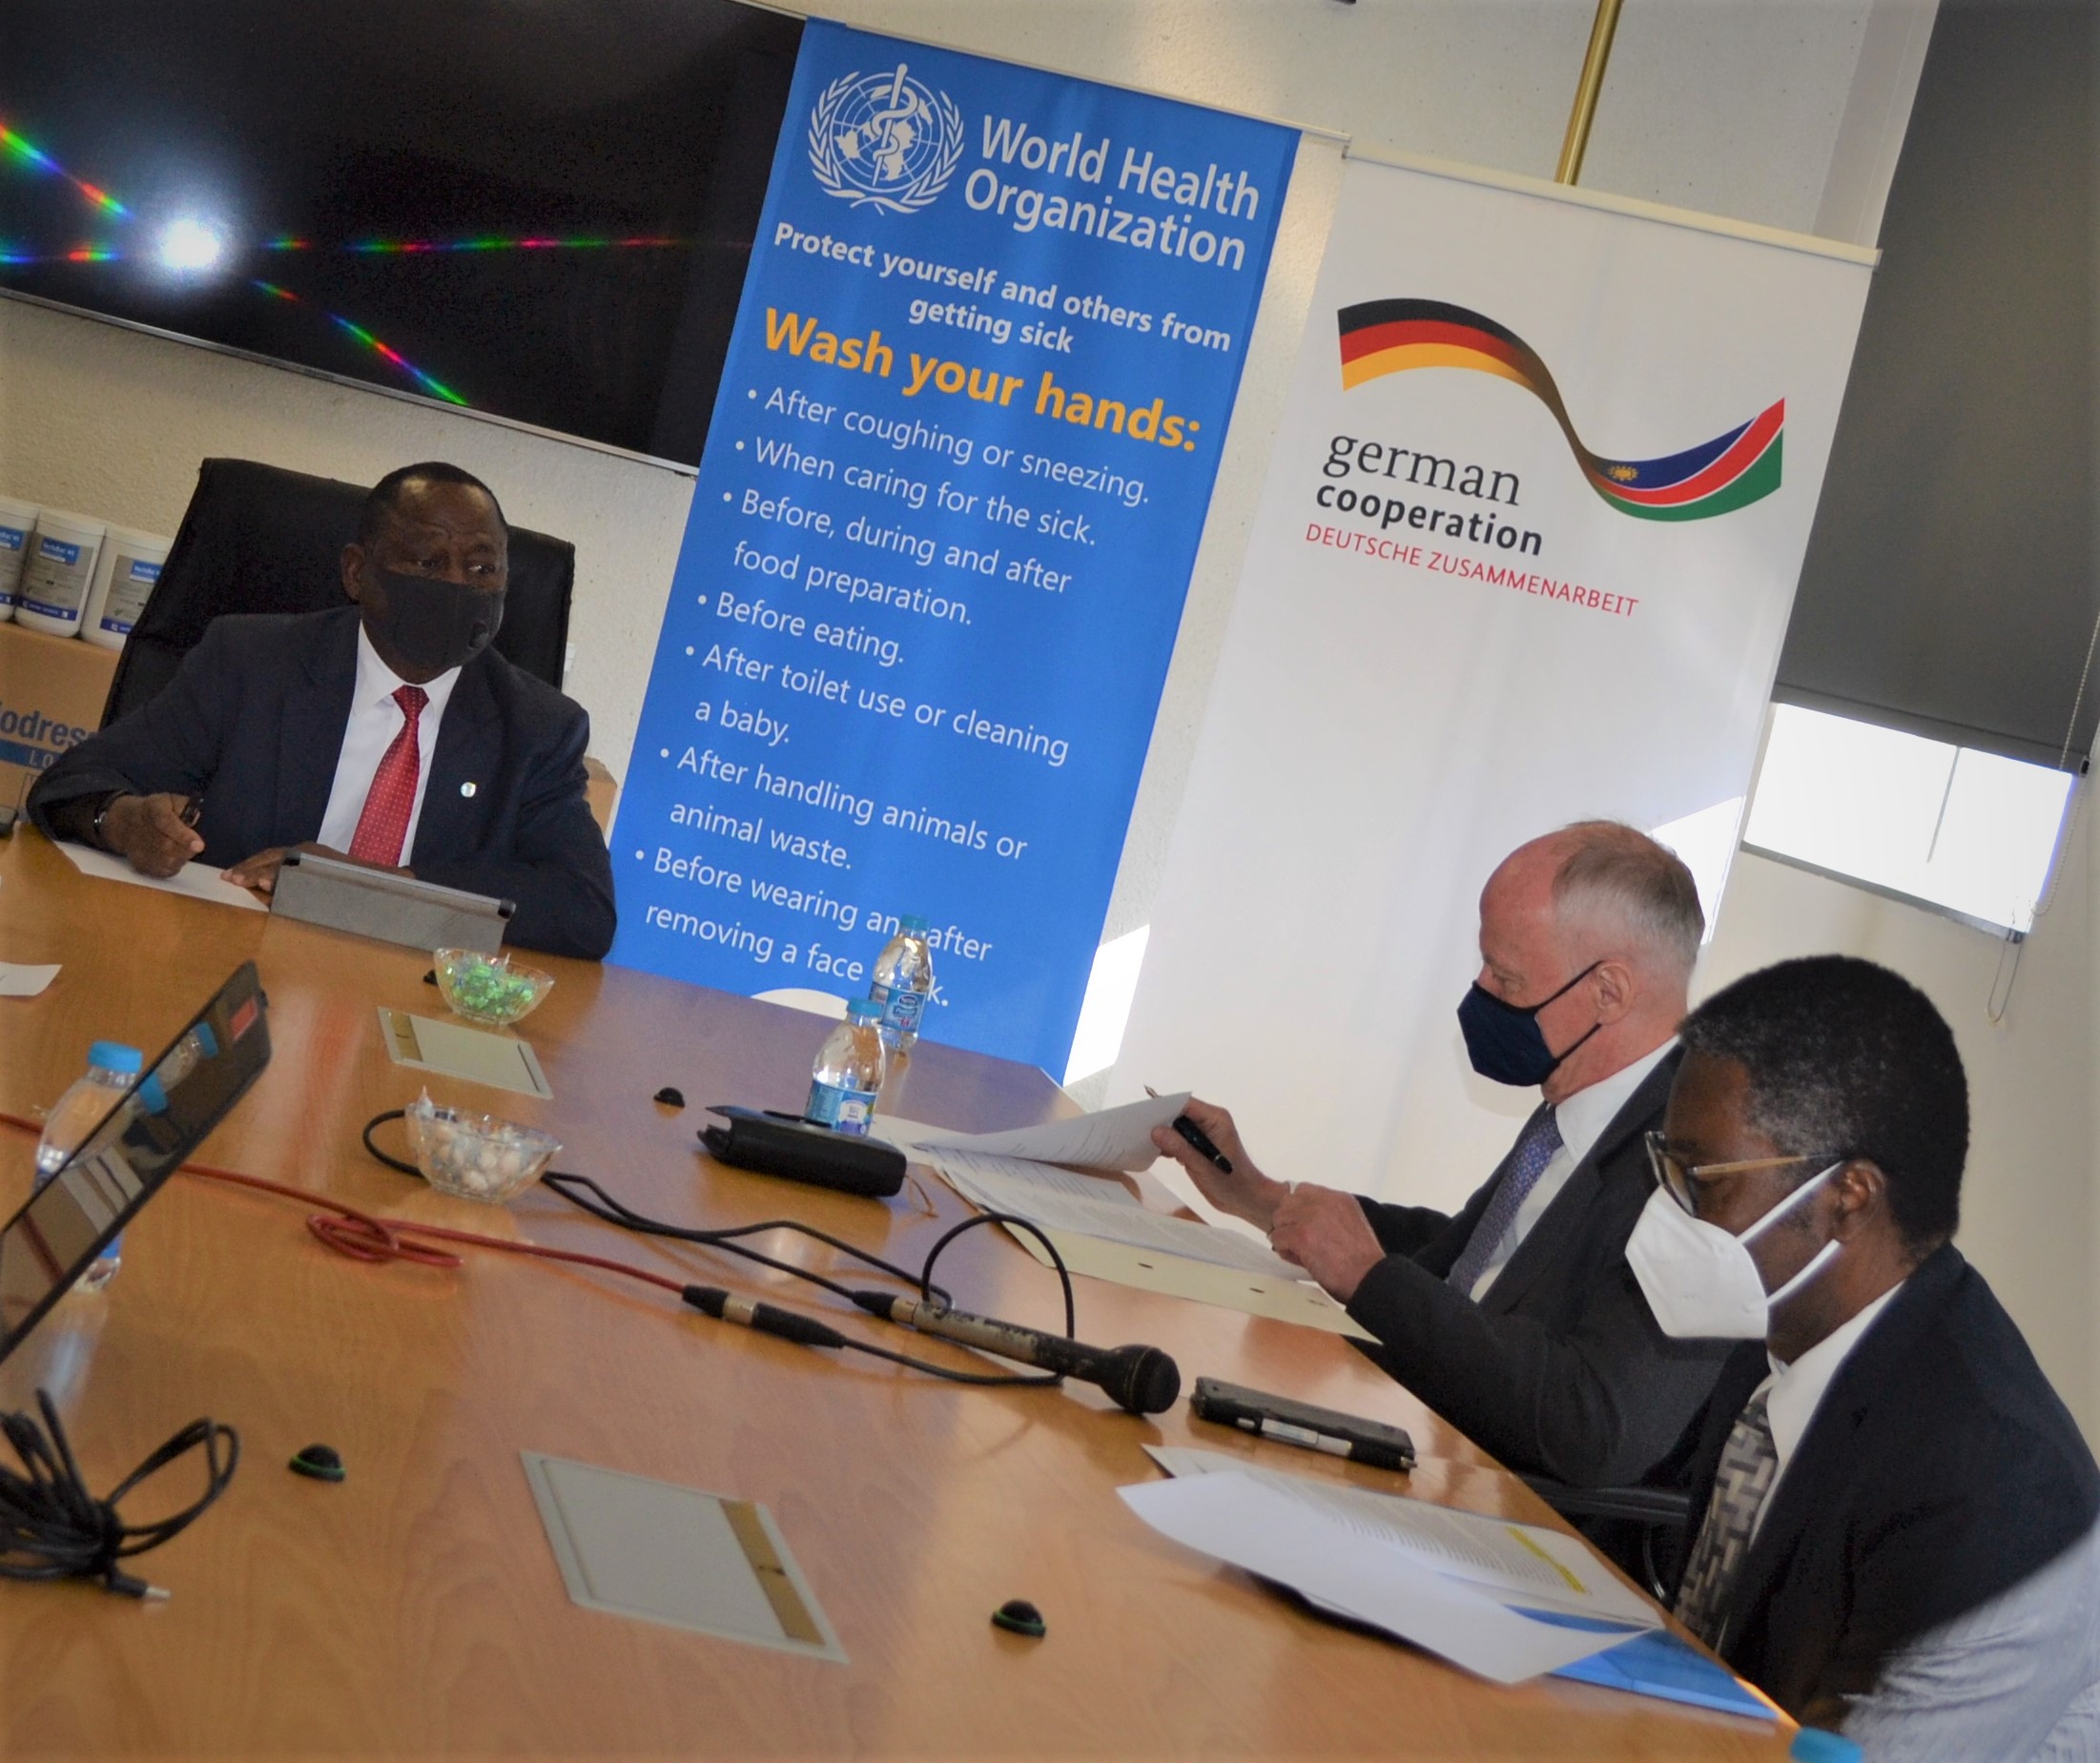 The Federal Government of Germany in partnership with WHO donated donating 462.000 surgical masks worth a little over 2 million Namibian Dollar to the Government of Namibia through the Ministry of Health and Social Services on 23 June 2021 with aim of protecting the frontline health worker against COVID-19.